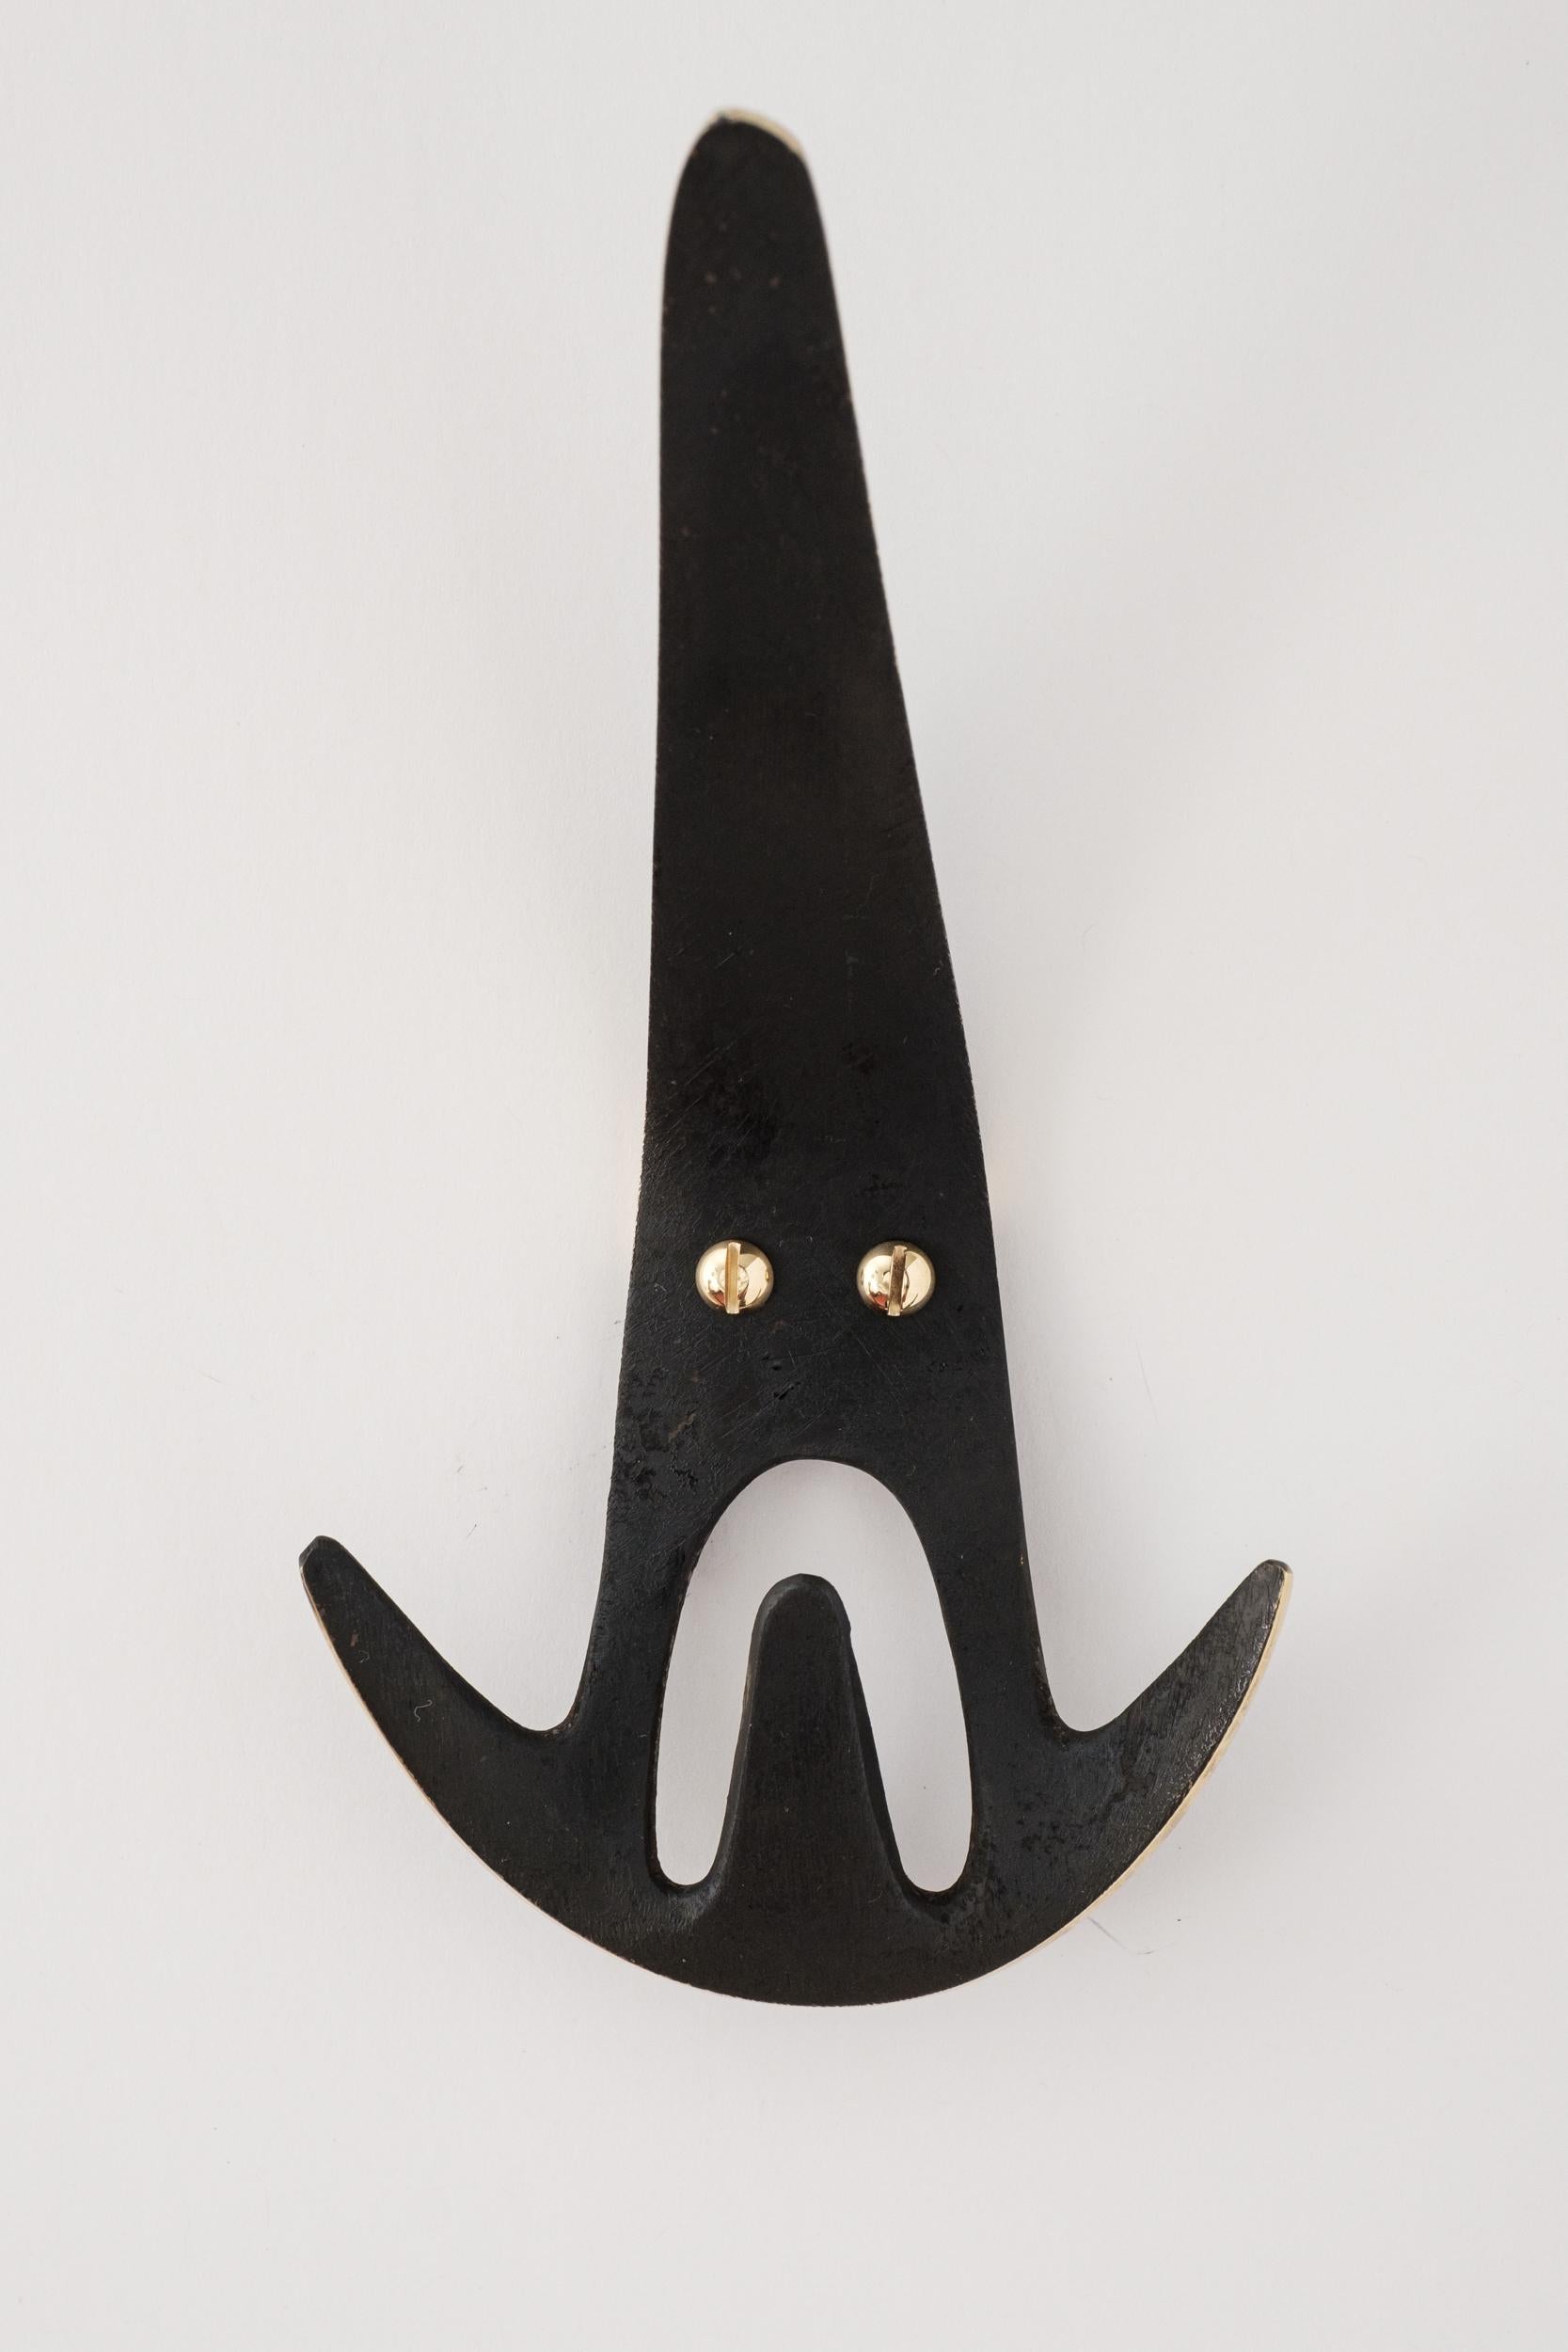 Contemporary Carl Auböck Model #4903 Patinated Brass Hook For Sale